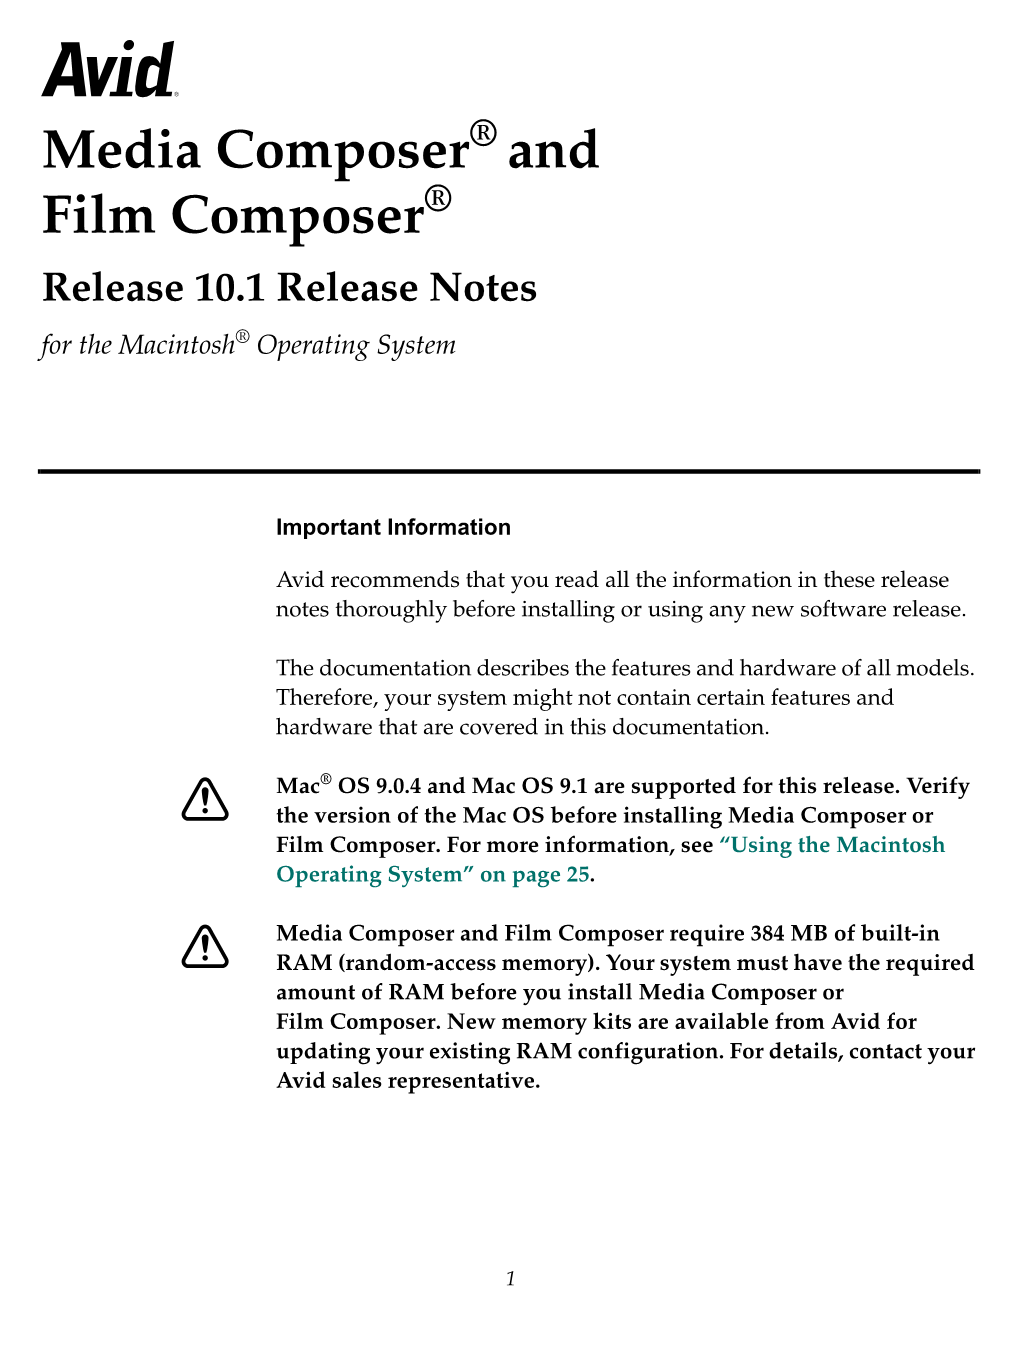 Media Composer and Film Composer Release 10.1 Release Notes for the Macintosh Operating System • Part 0130-04534-02 Rev